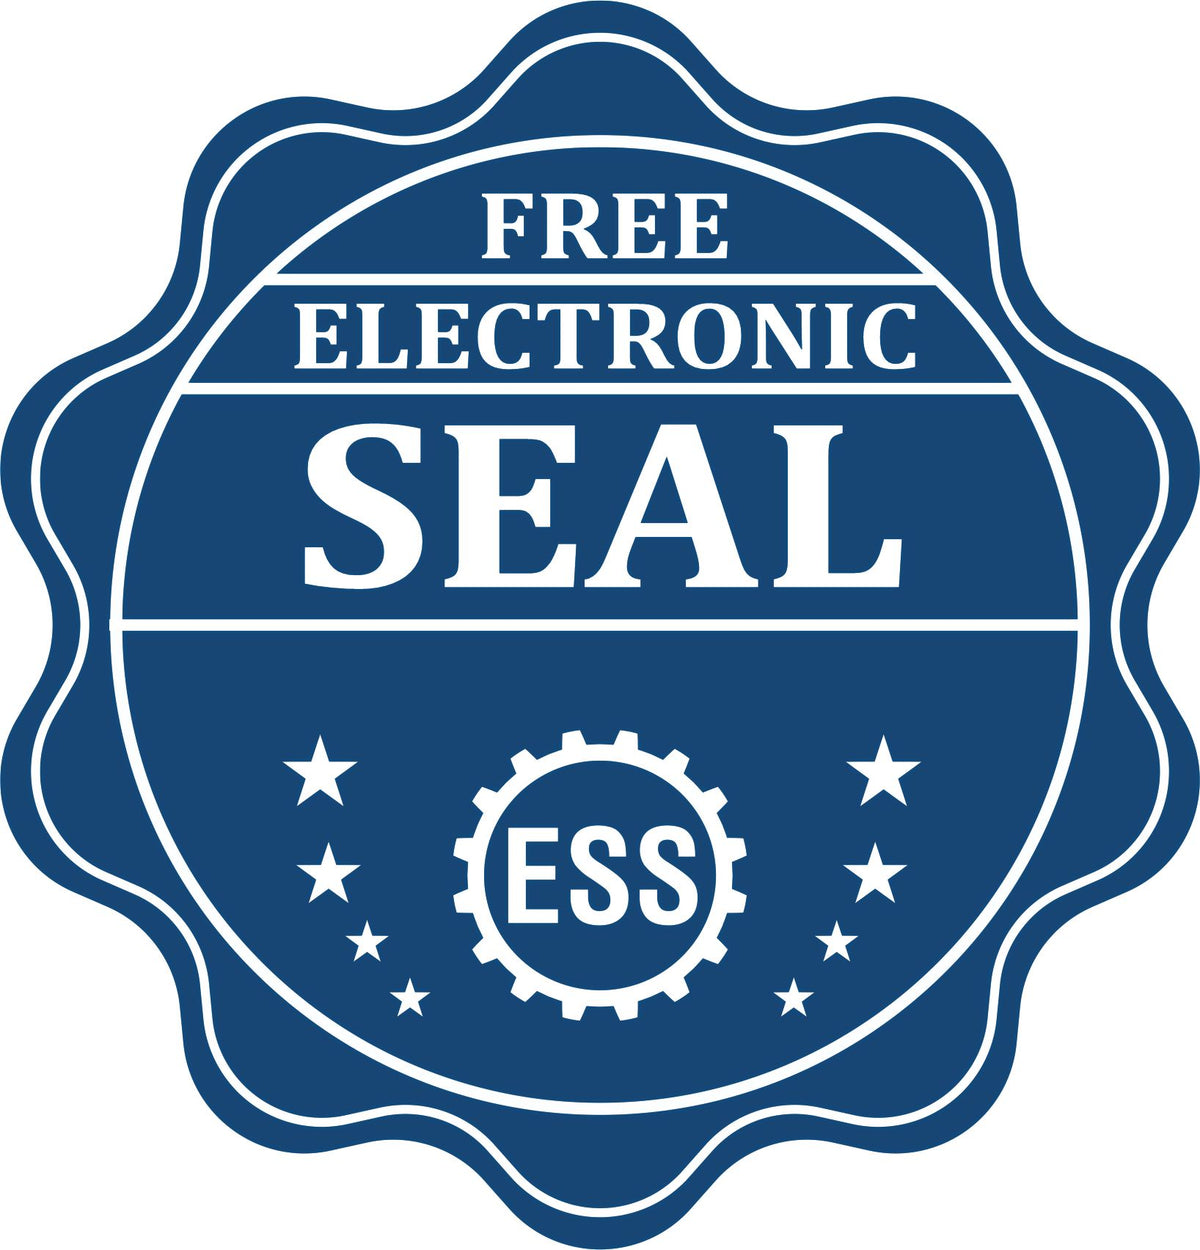 A badge showing a free electronic seal for the Wooden Handle North Dakota Rectangular Notary Public Stamp with stars and the ESS gear on the emblem.